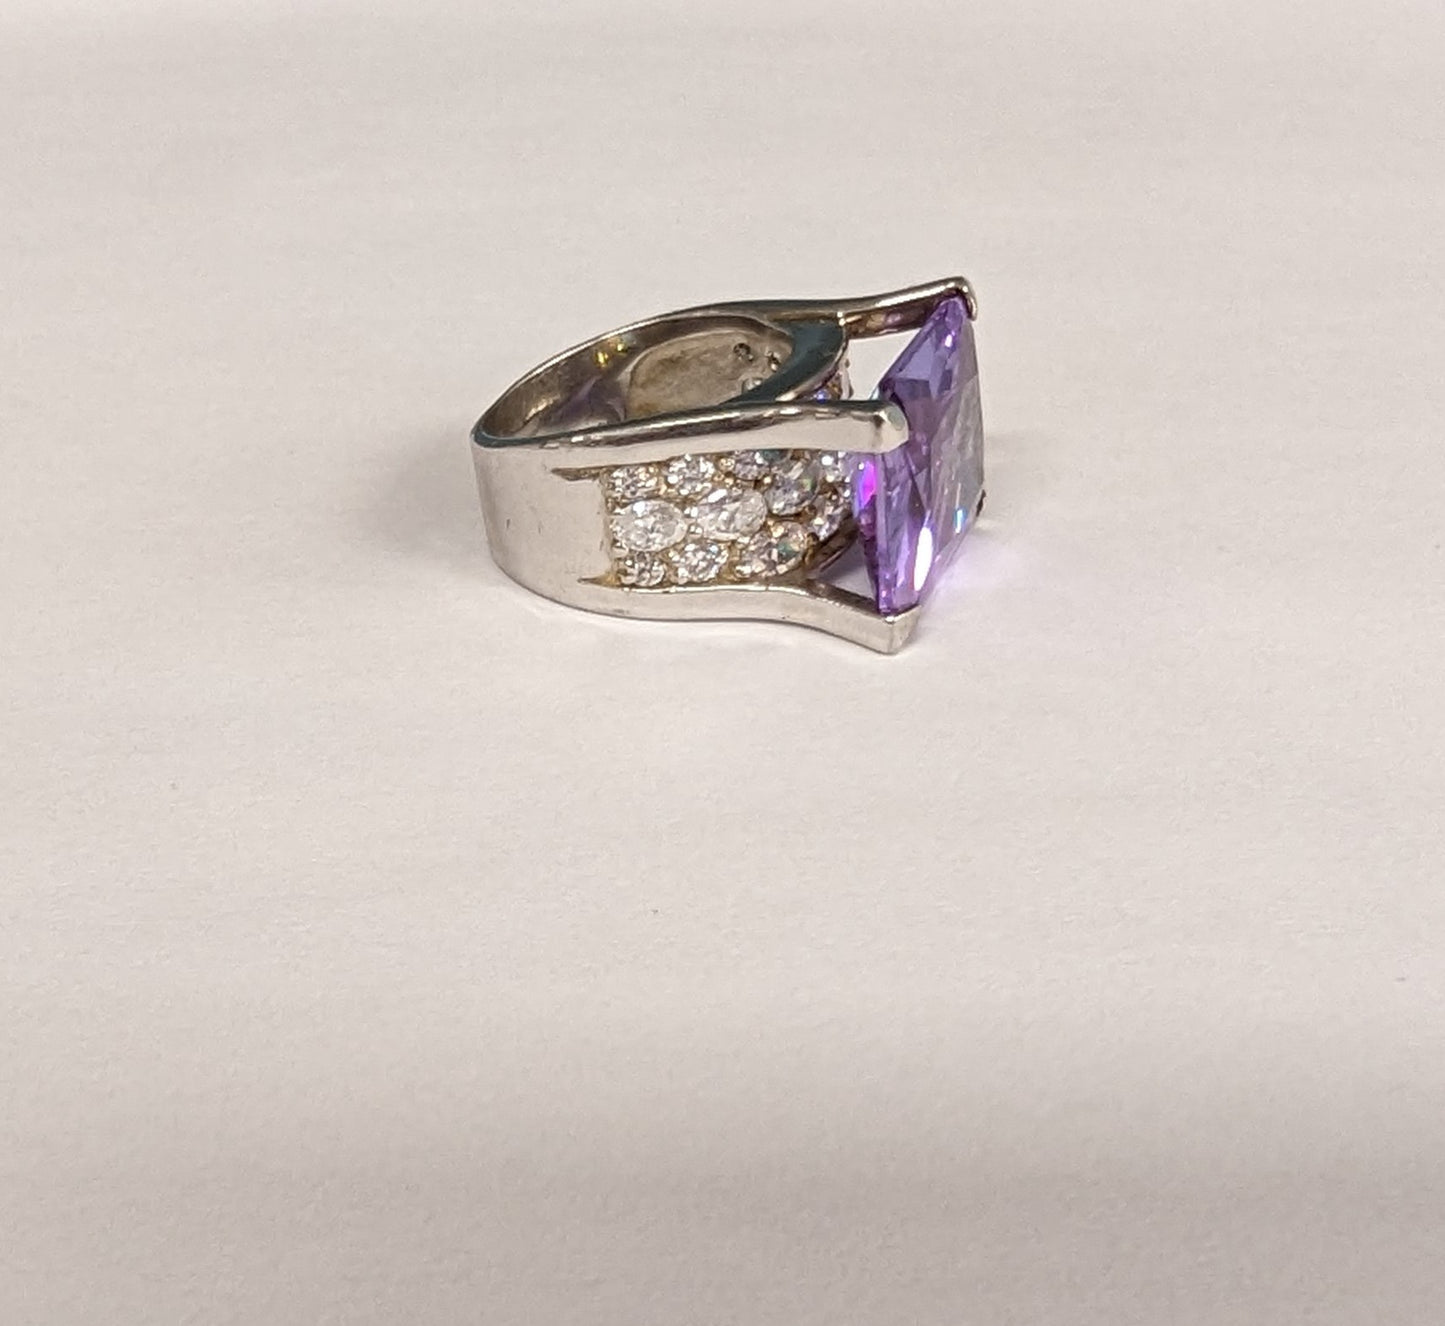 19.8ct Emerald-Cut Lavender CZ Sterling Silver Ring